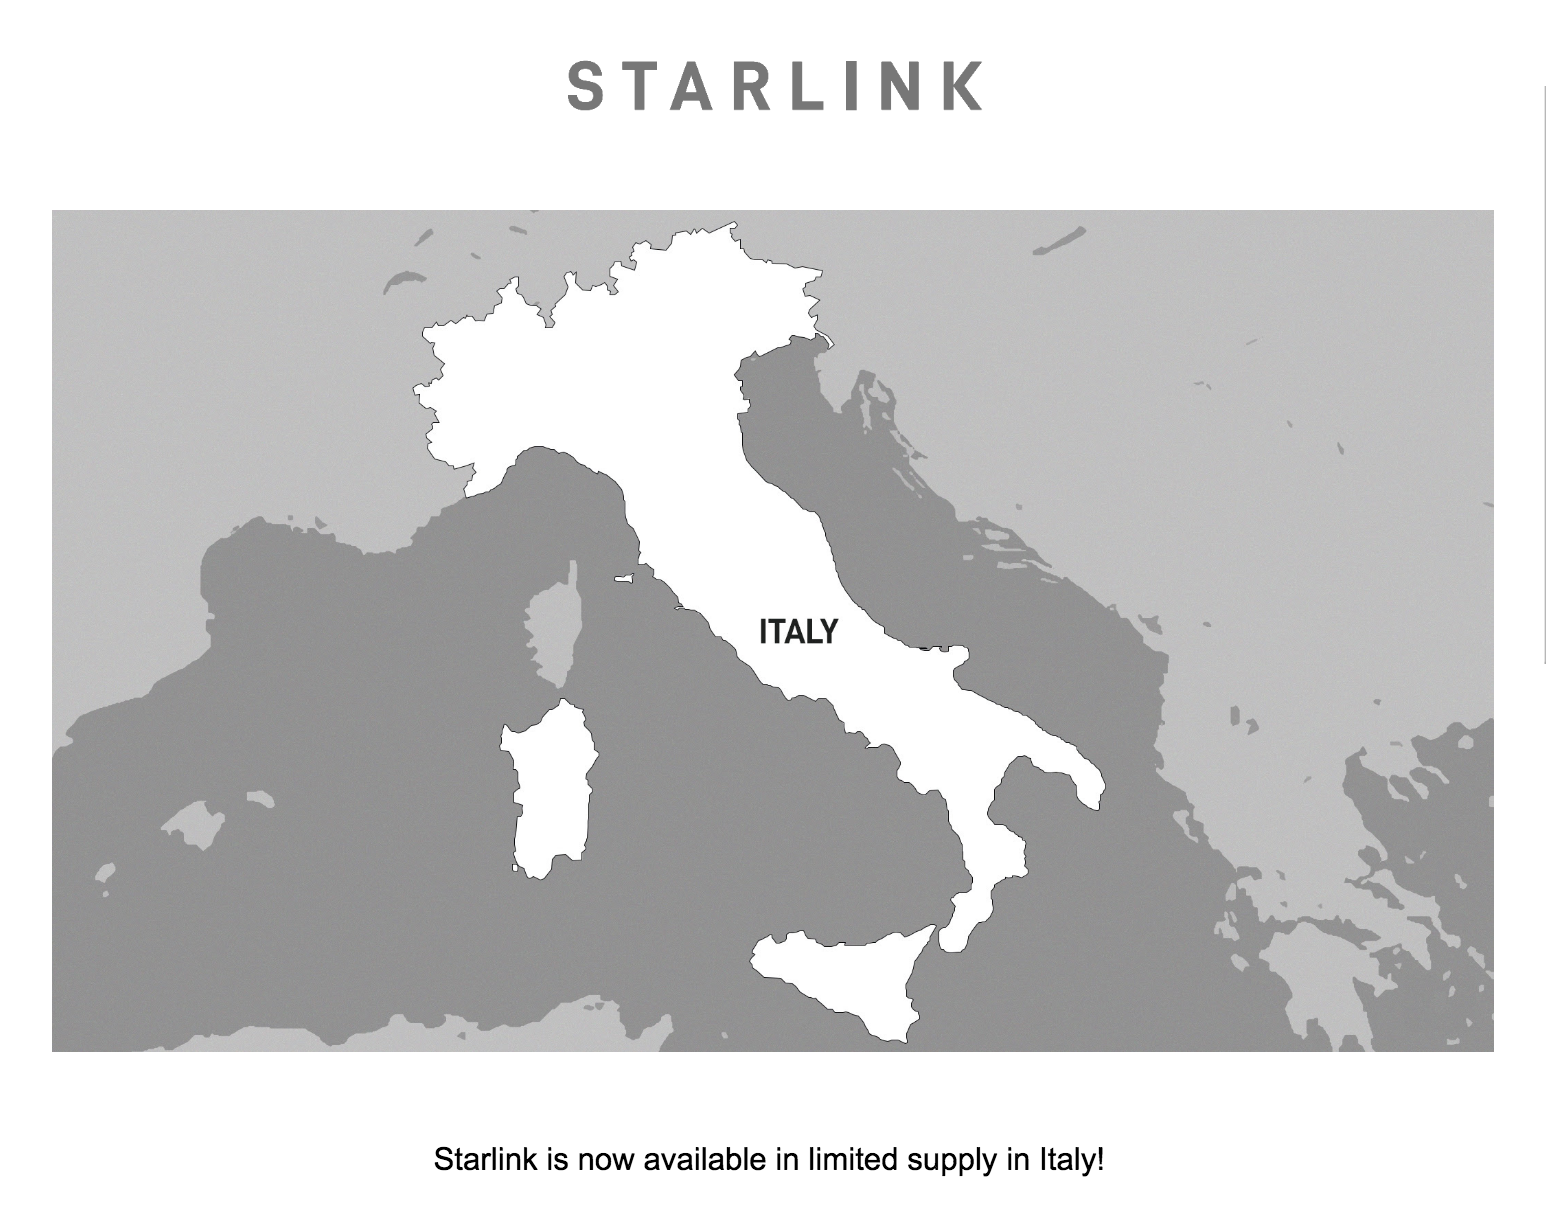 SpaceX Starlink Internet Service Is Available In Italy, Users Share Download Speeds Over 200Mbps